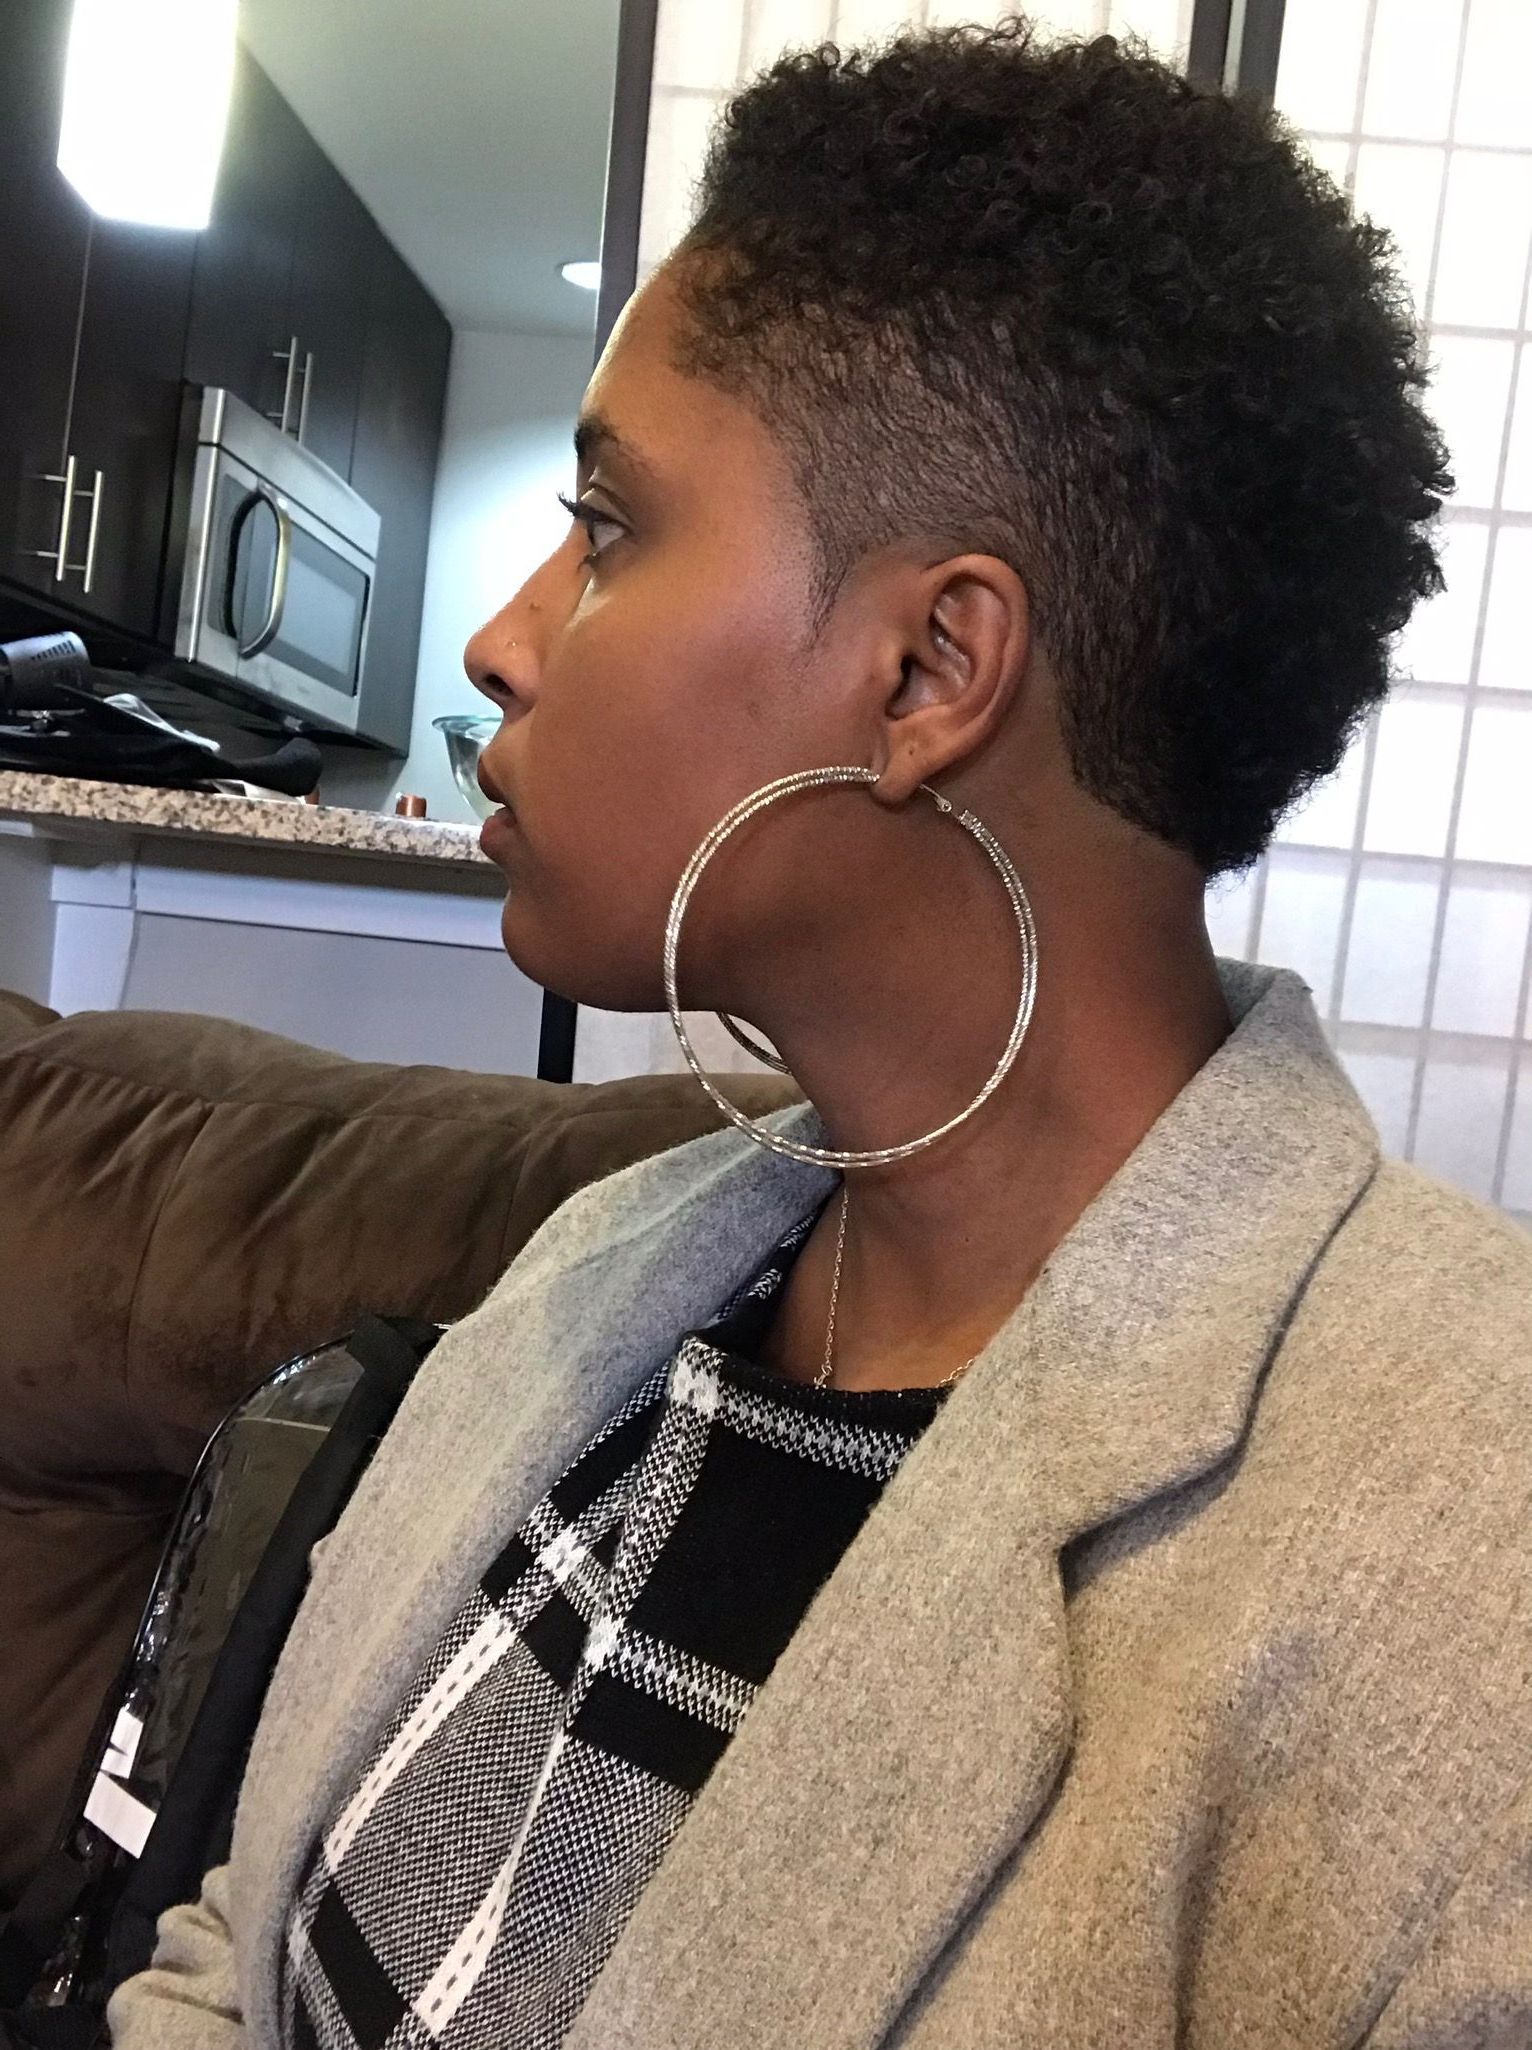 Twa Mohawk Shaved Sides Curly Hair Barber Short Hair In 2019 With Regard To Recent Short Hair Mohawk Hairstyles (View 2 of 20)